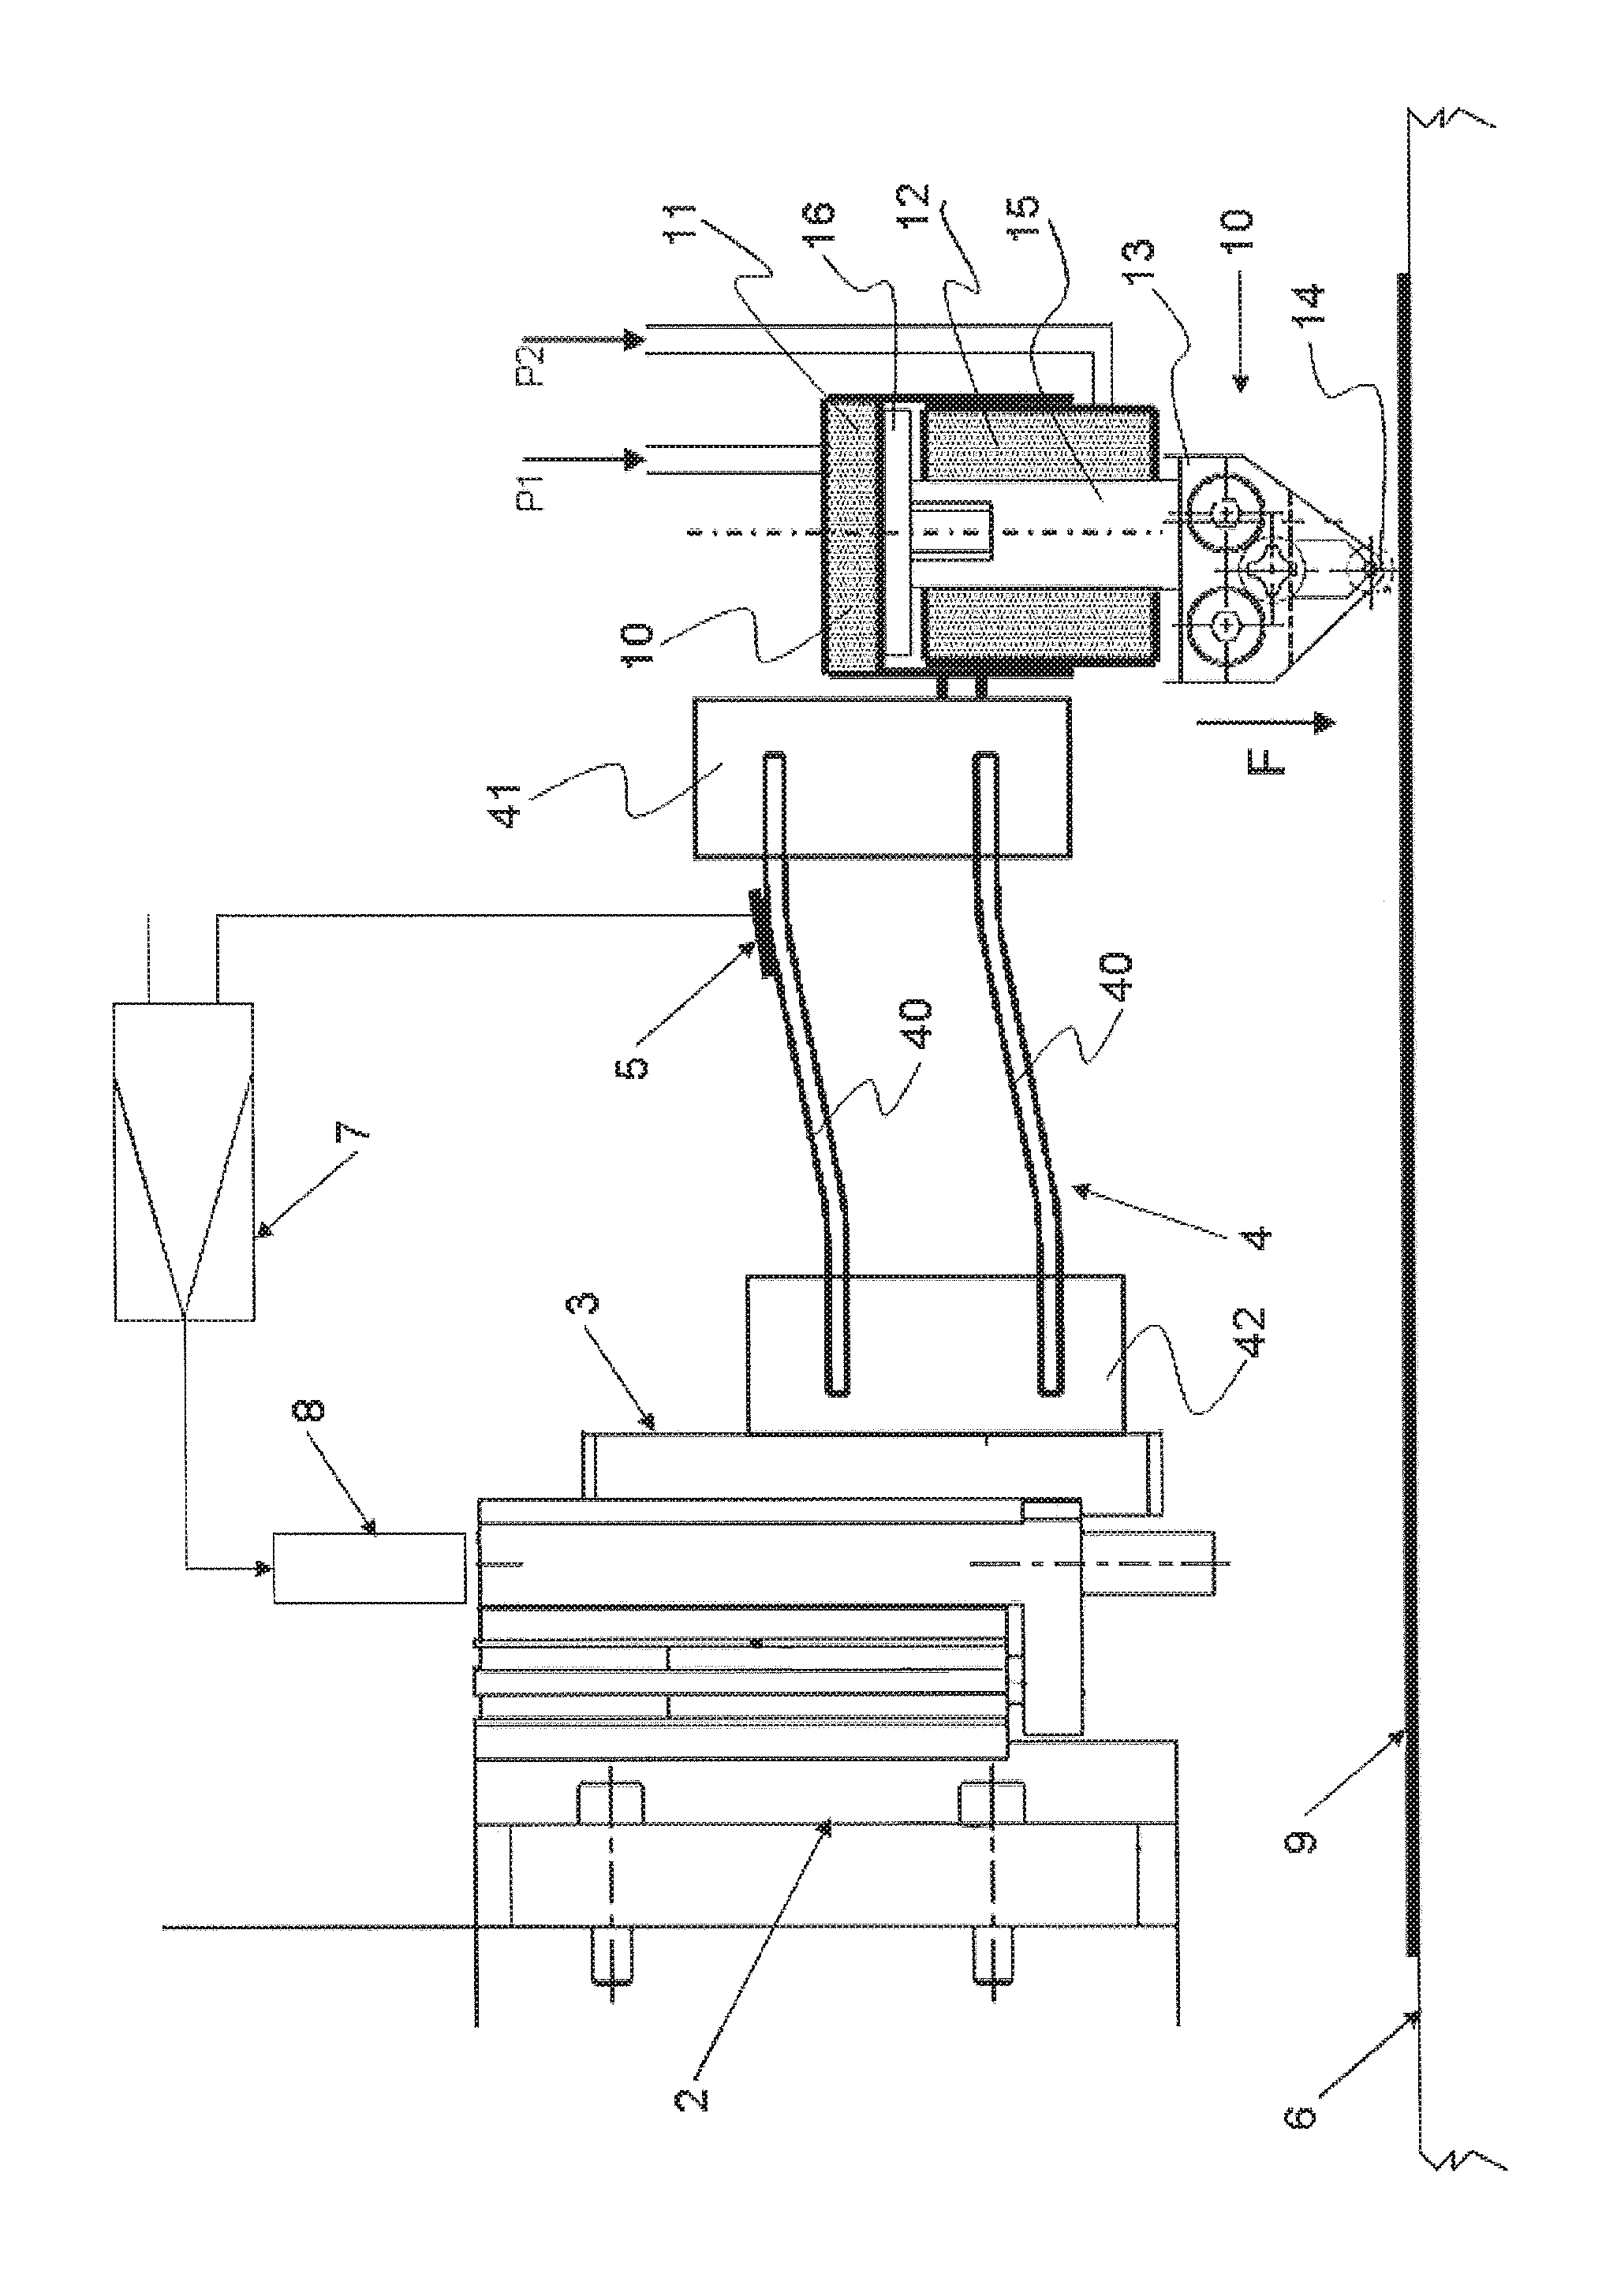 Method and apparatus for scoring thin glass and scored thin glass